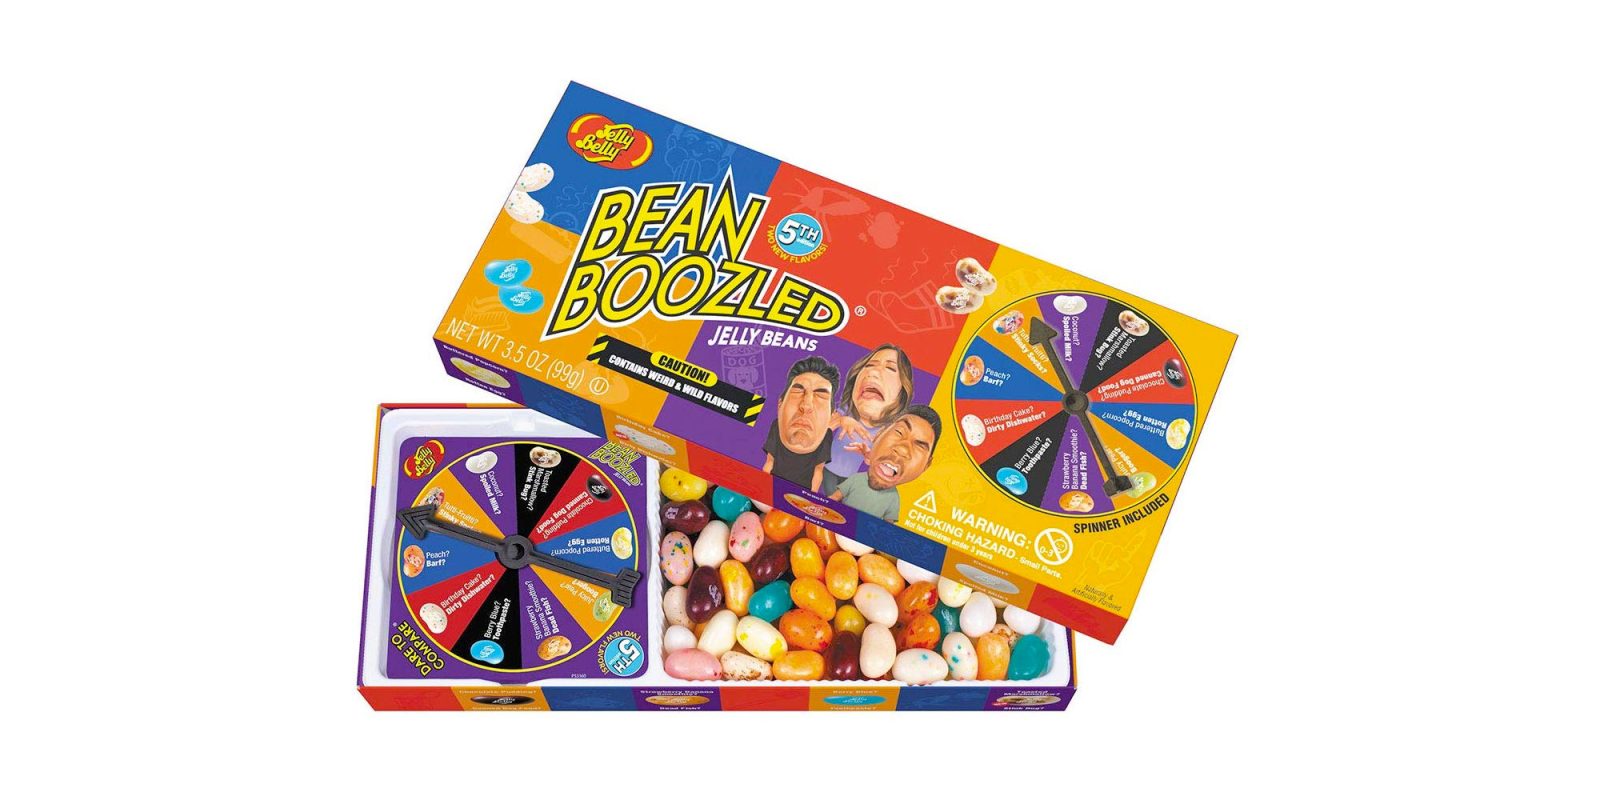 You’ll find products like Jelly Belly’s BeanBoozled game, KIND bars... 